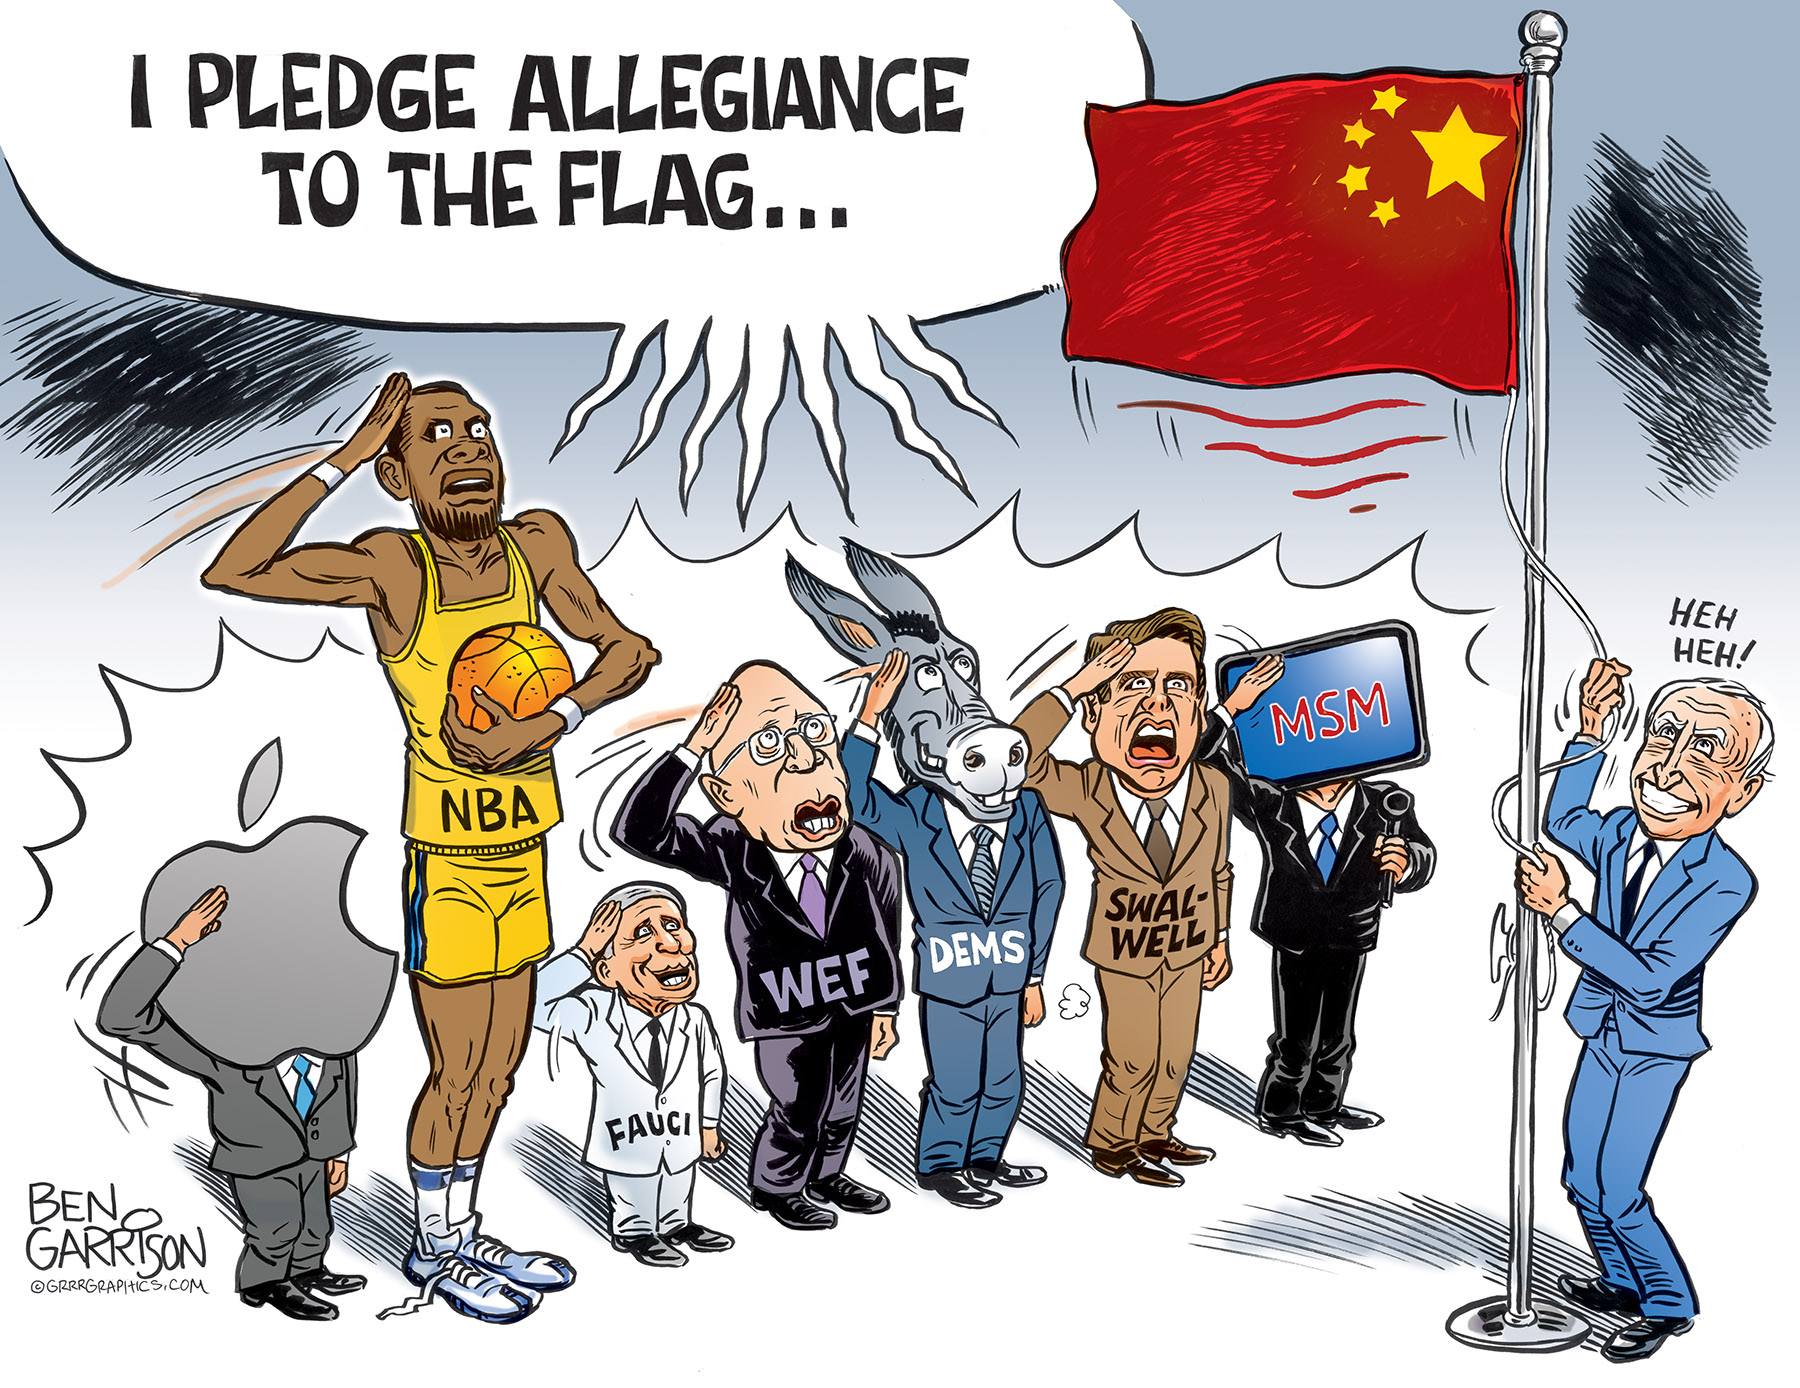 Which Flag Do They Pledge Allegiance to?